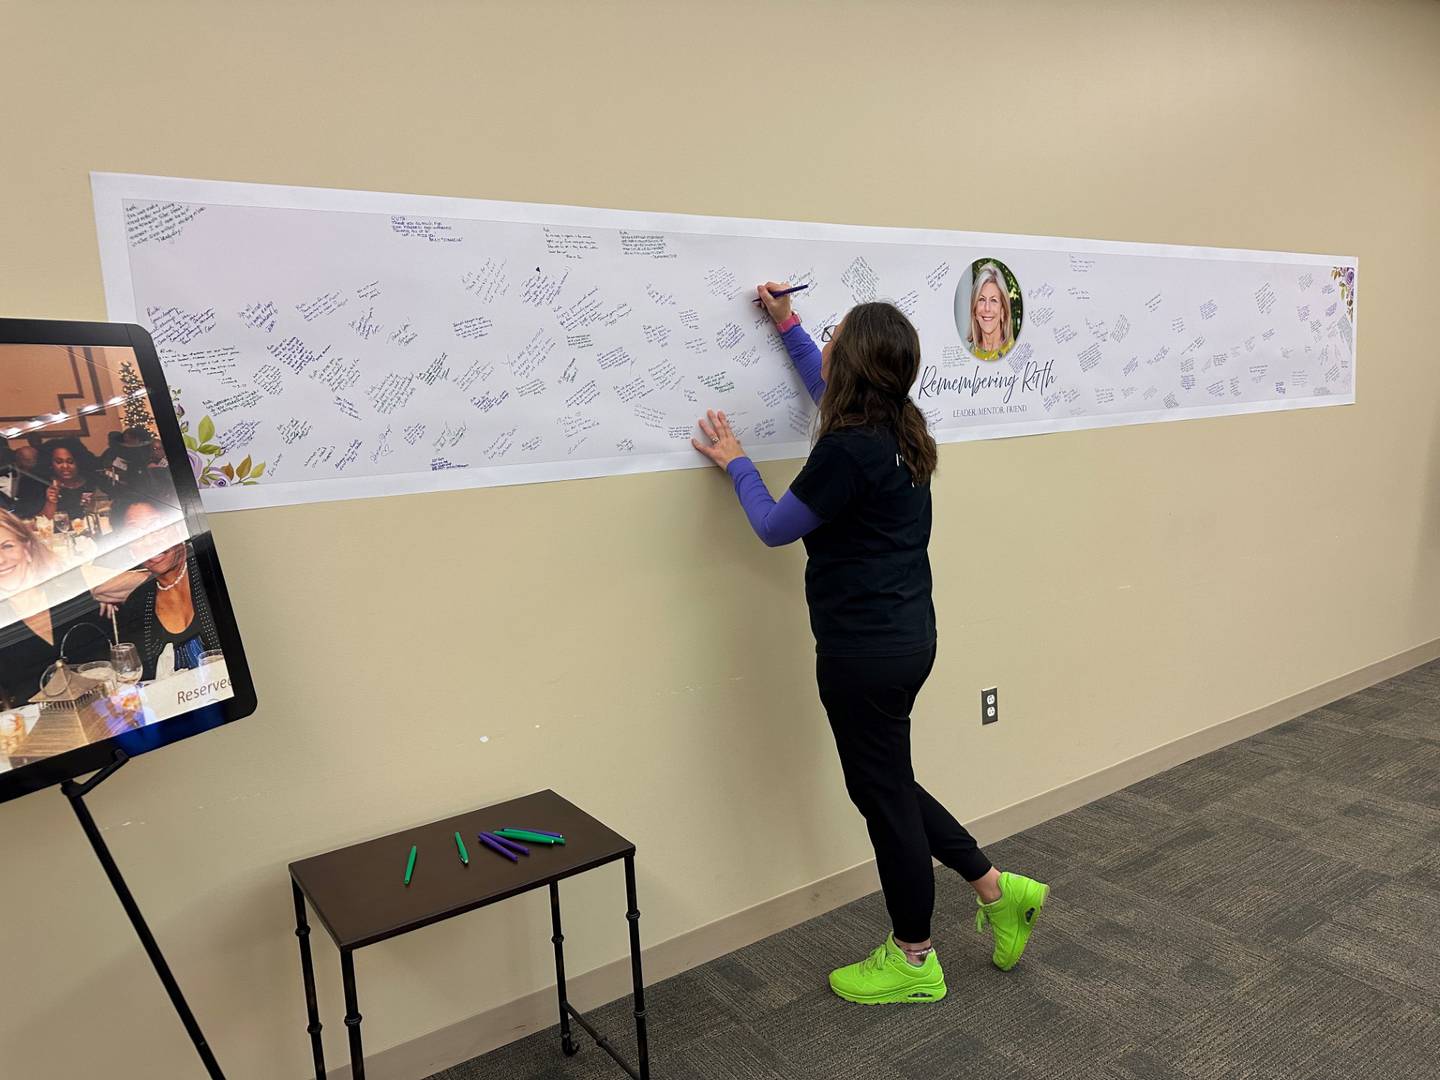 An employee signs a tribute wall for Ruth Colby, former president and chief executive officer of Silver Cross Hospital in New Lenox. Silver Cross held a celebration on Friday and Saturday to honor Colby's life and legacy.